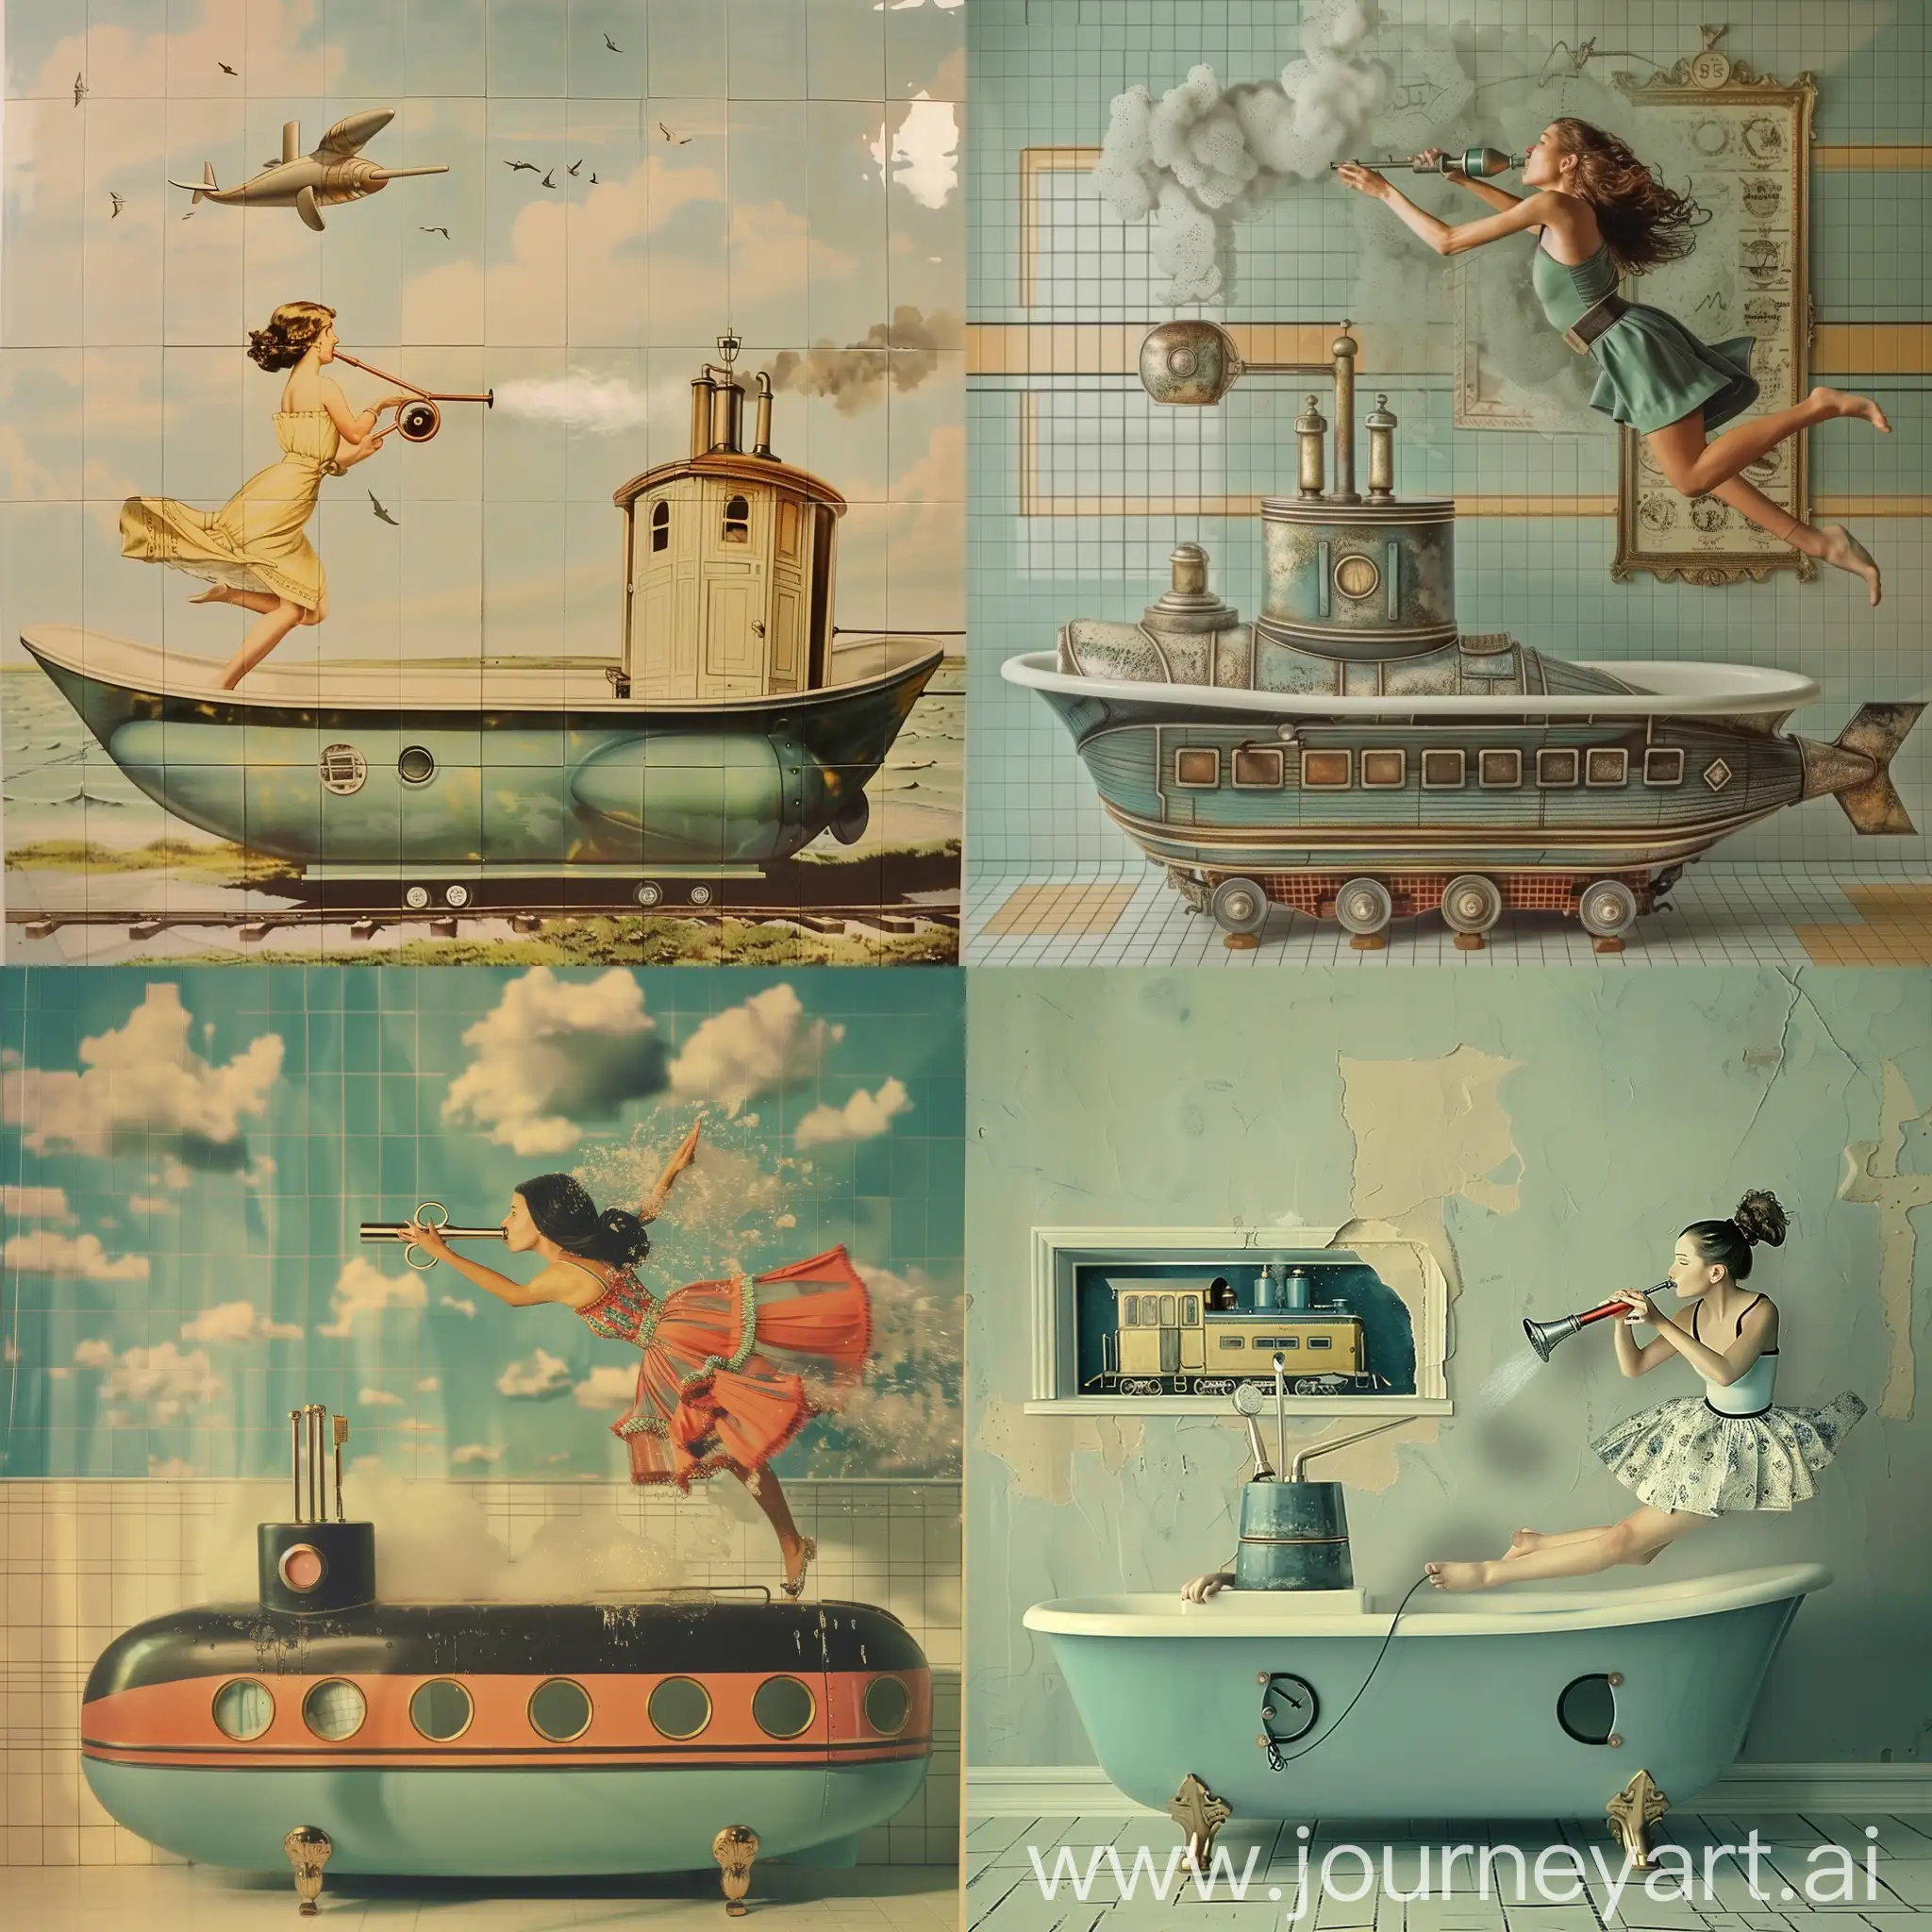 Bathtub themed with a vintage submarine with a lady diving out of it instead of in whilst blowing the train whistle